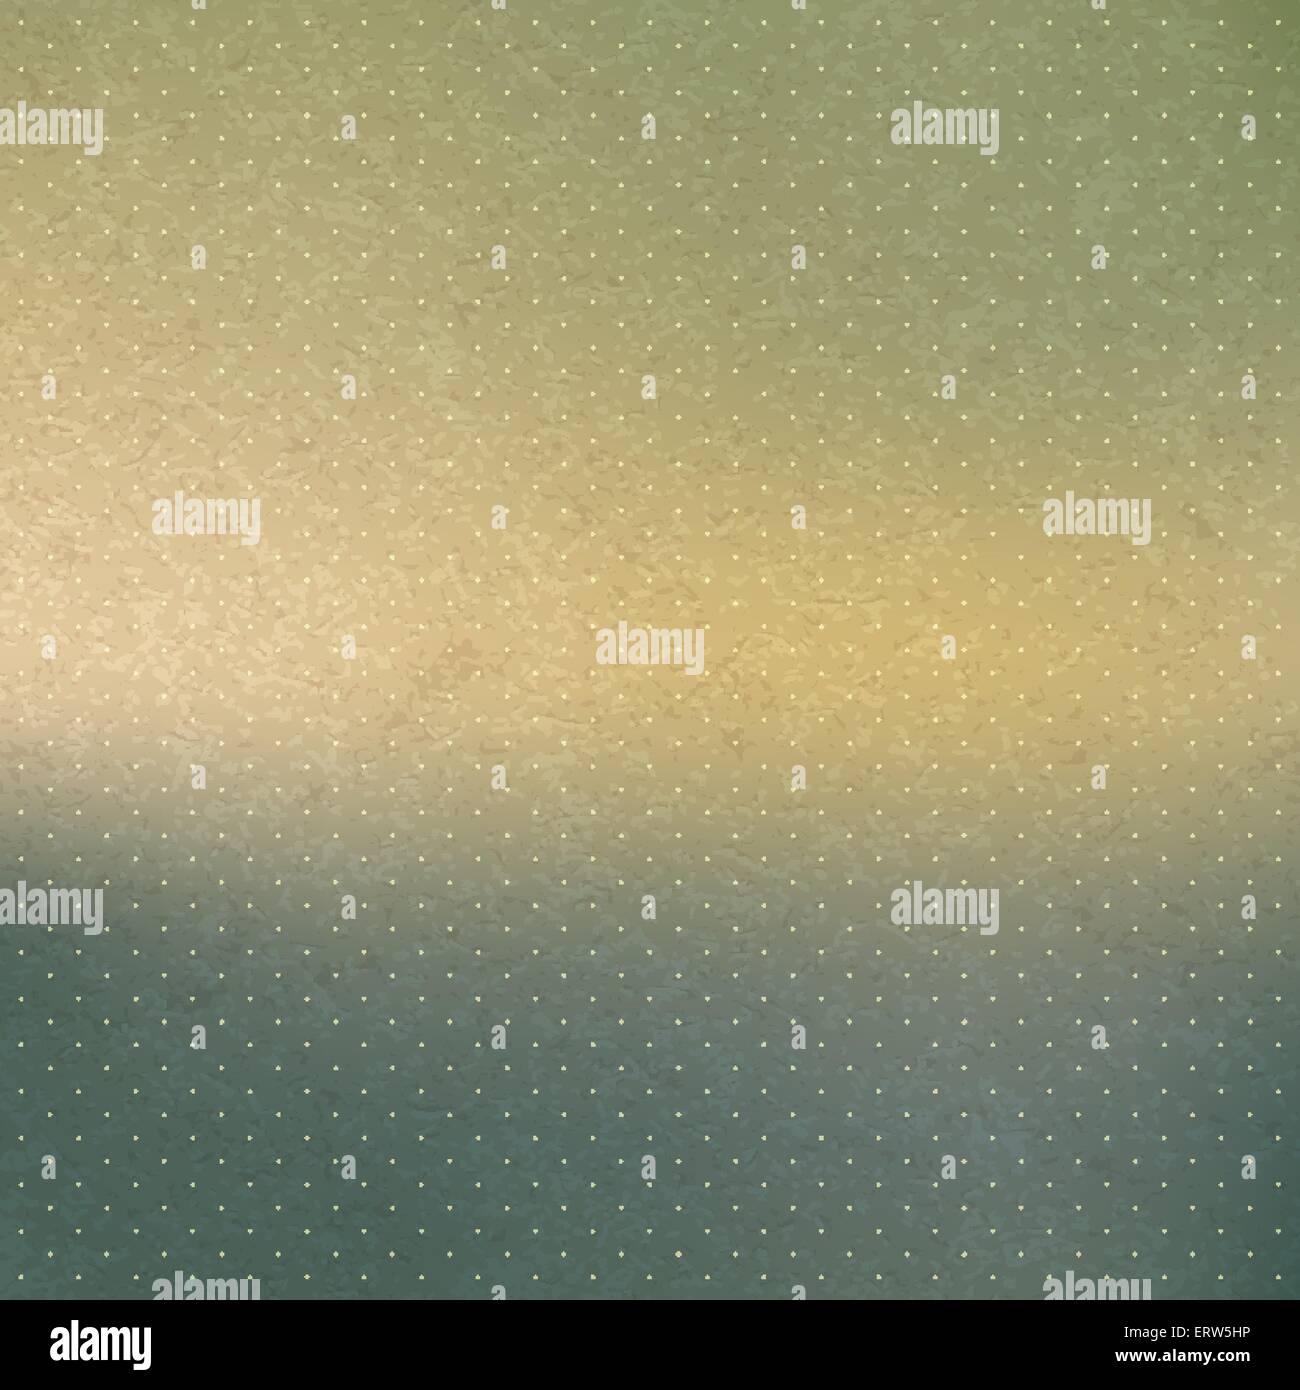 Abstract background with sky and clouds. Vintage style. Vector illustration. Stock Vector